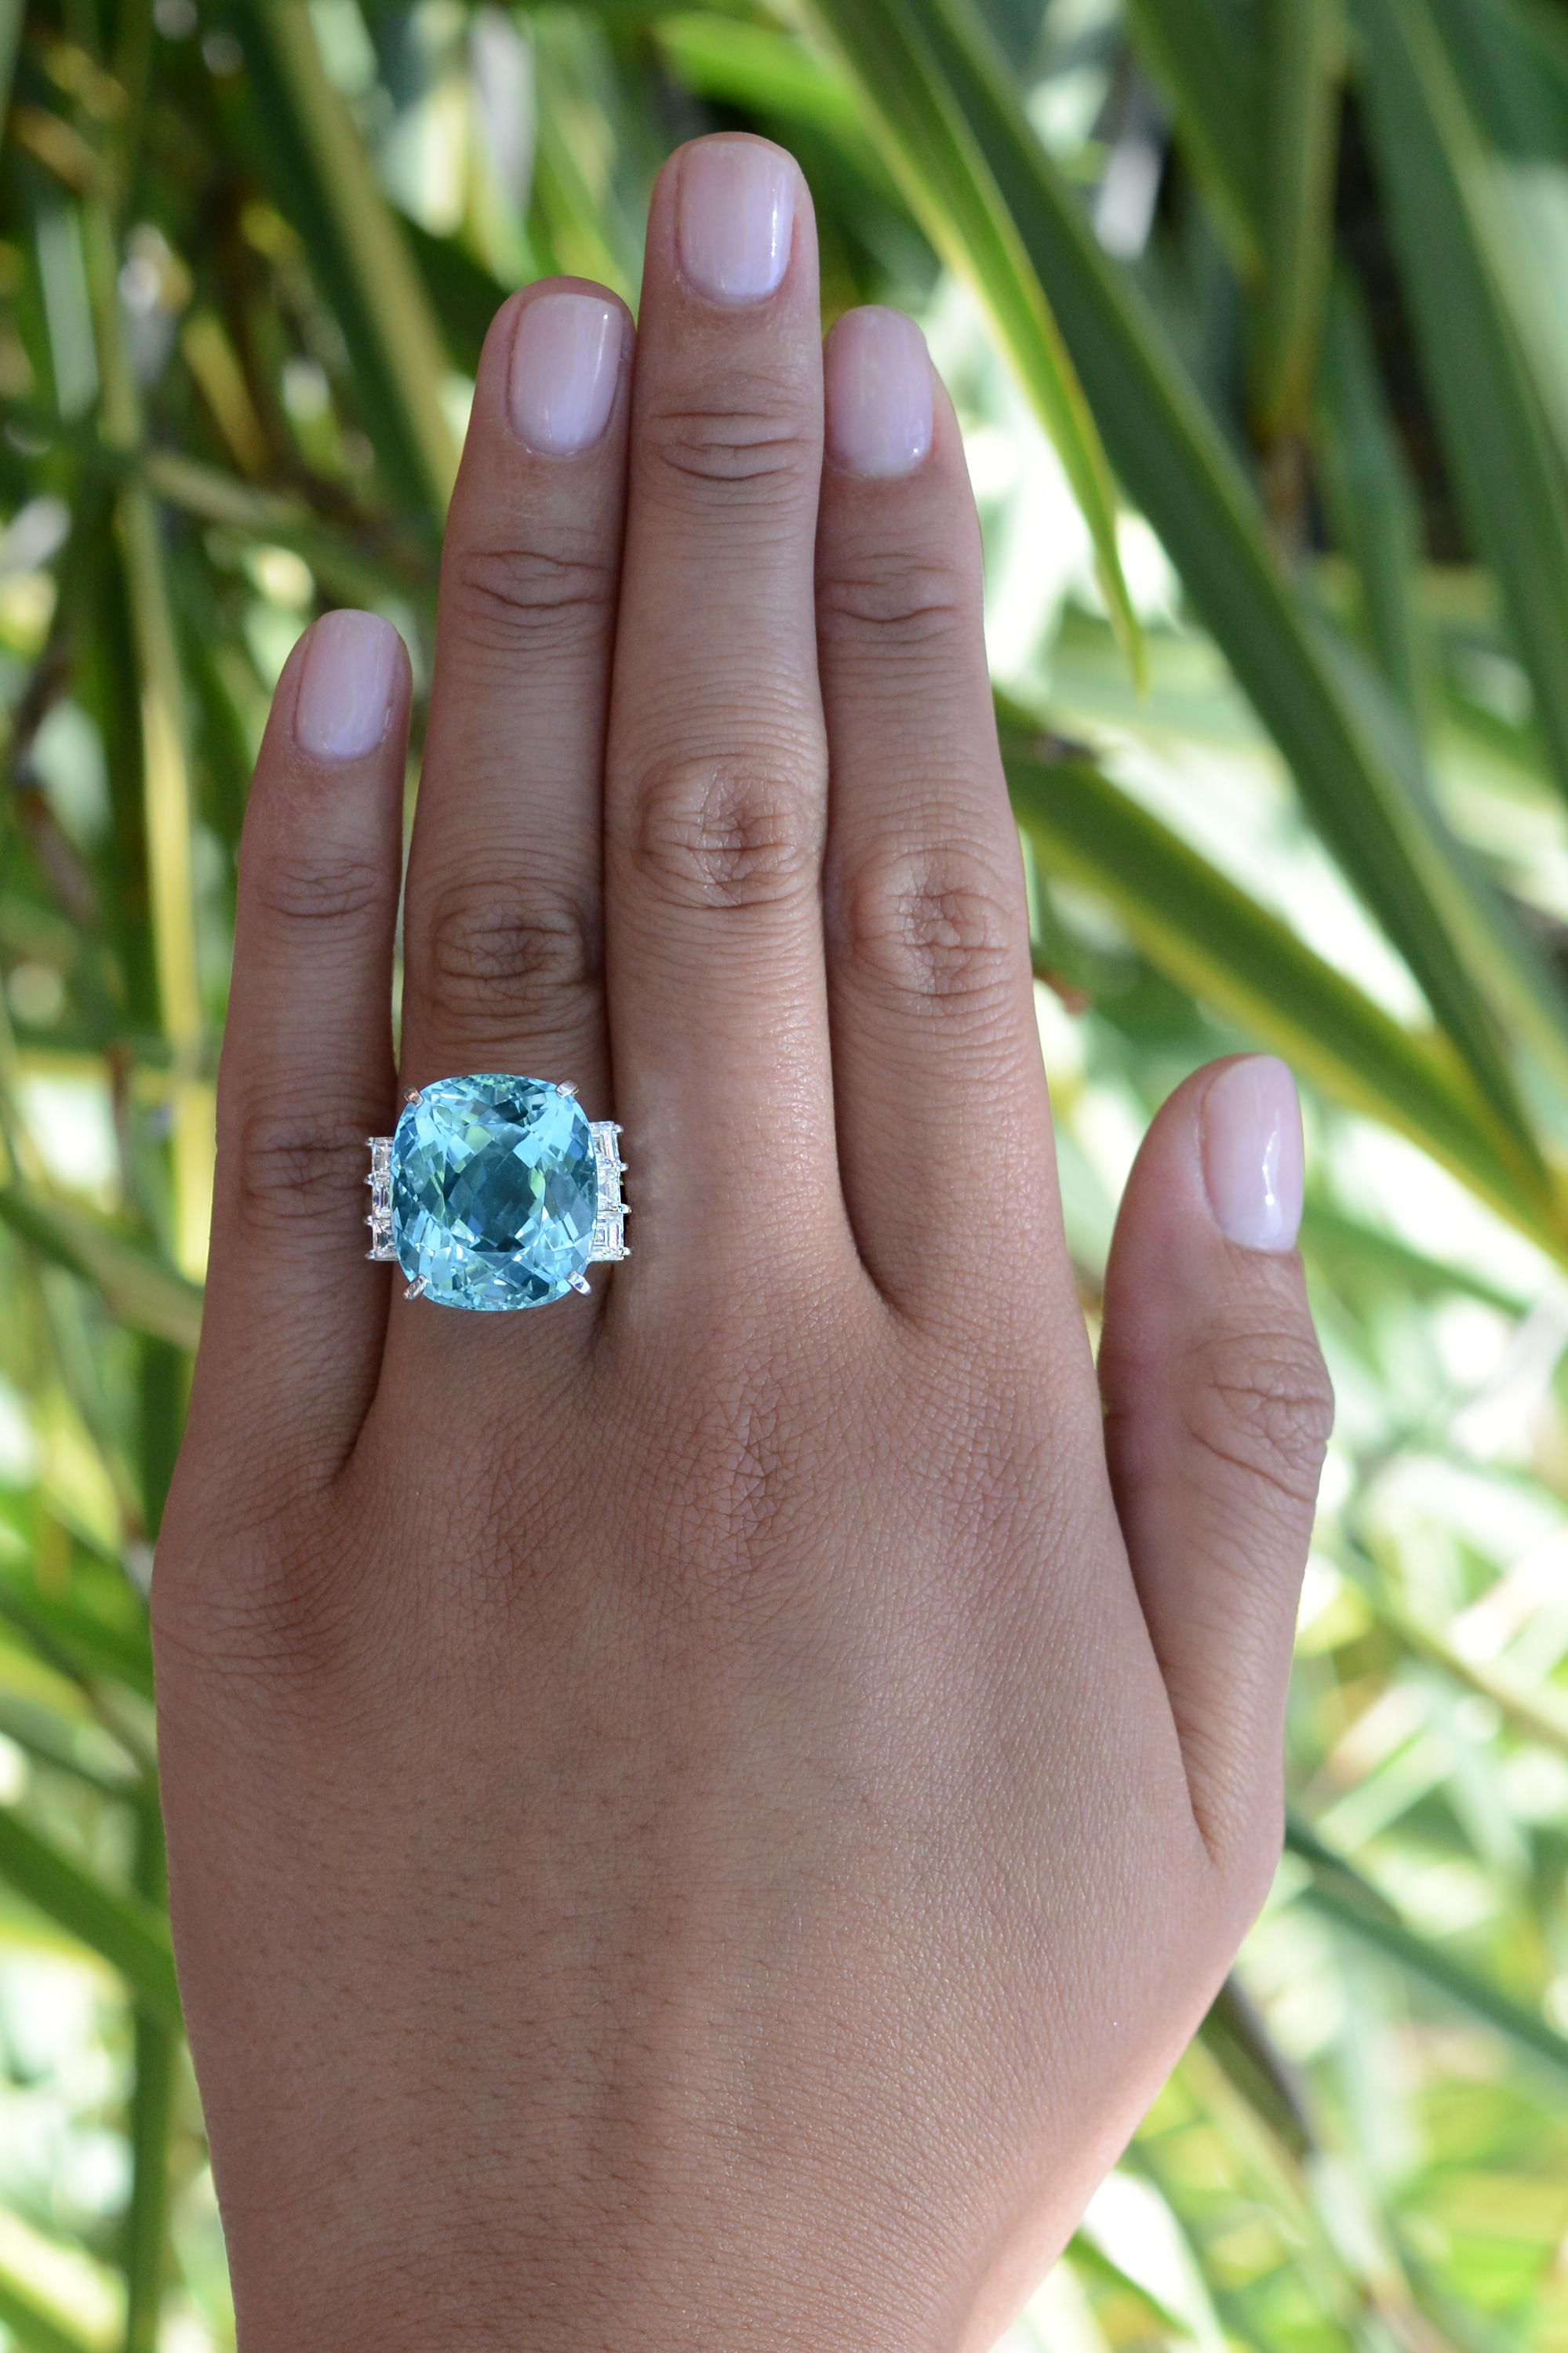 This cocktail ring features the most amazing aquamarine you've ever seen. The large, 20.75 carat gemstone portrays exemplary color found exclusively in Brazil's Santa Maria mines. The expert faceting and fascinating cut allows for even color